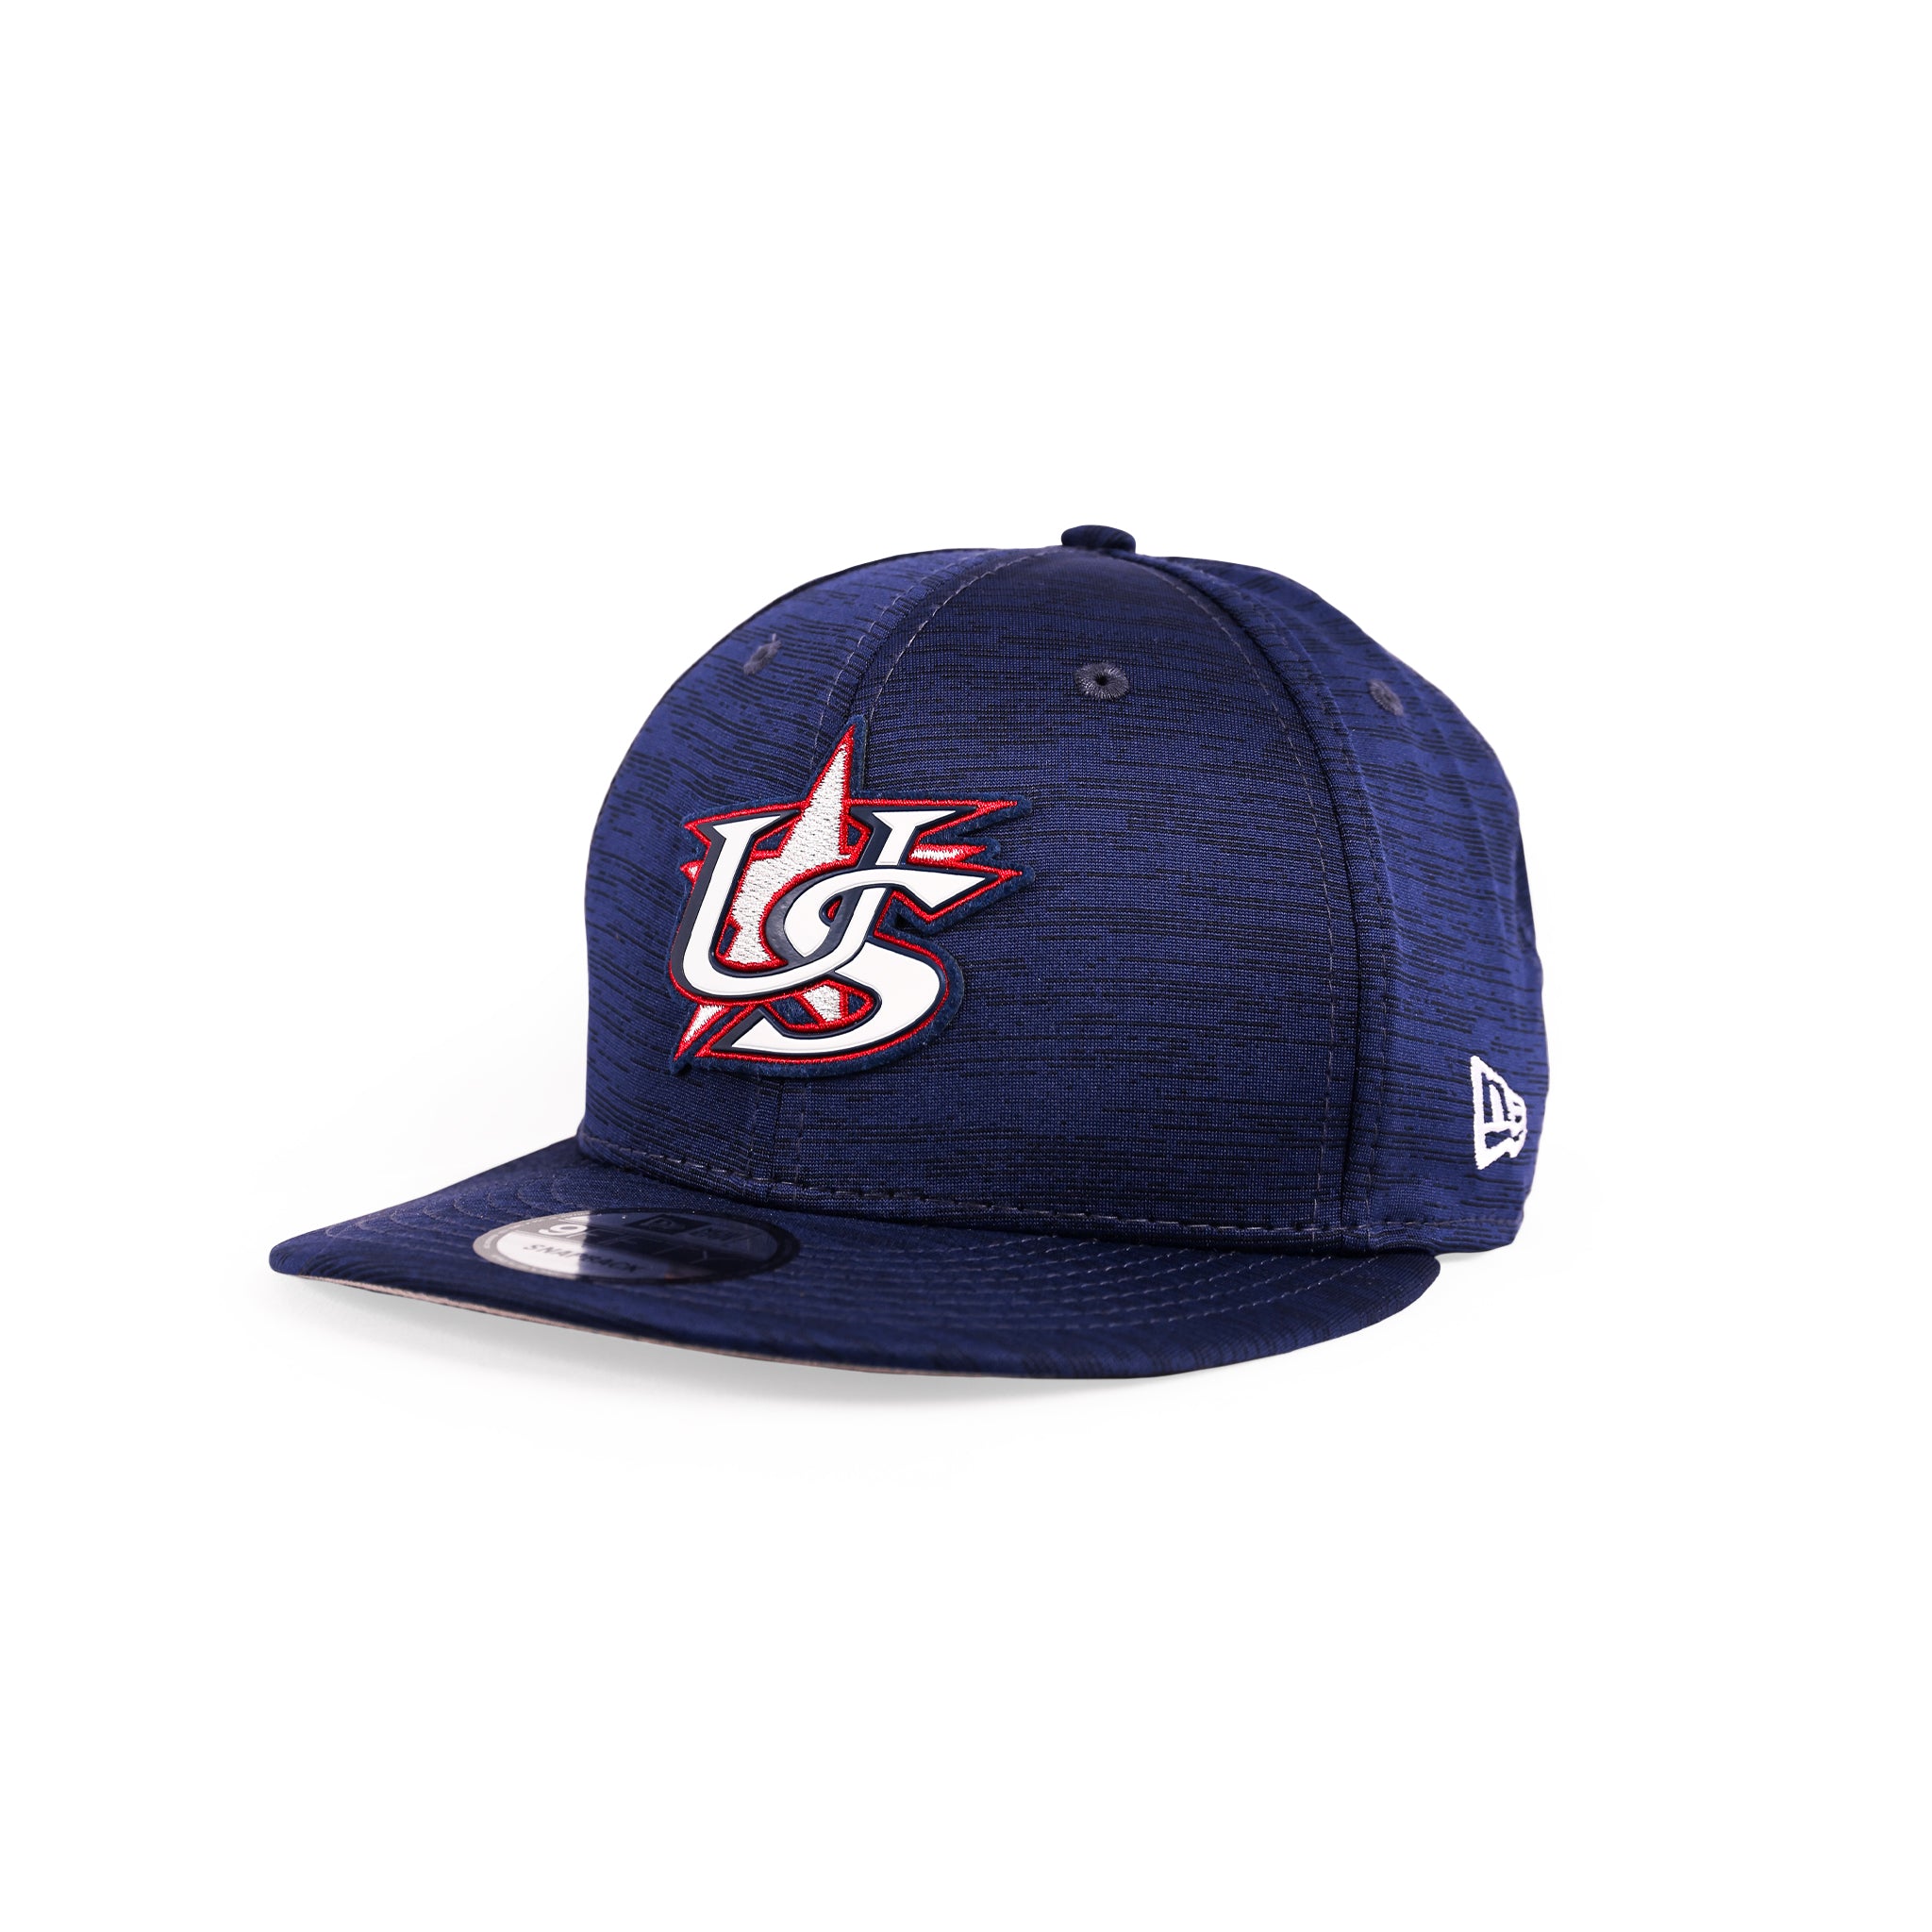 2023 Clubhouse Collection 9FIFTY | USA Baseball Shop